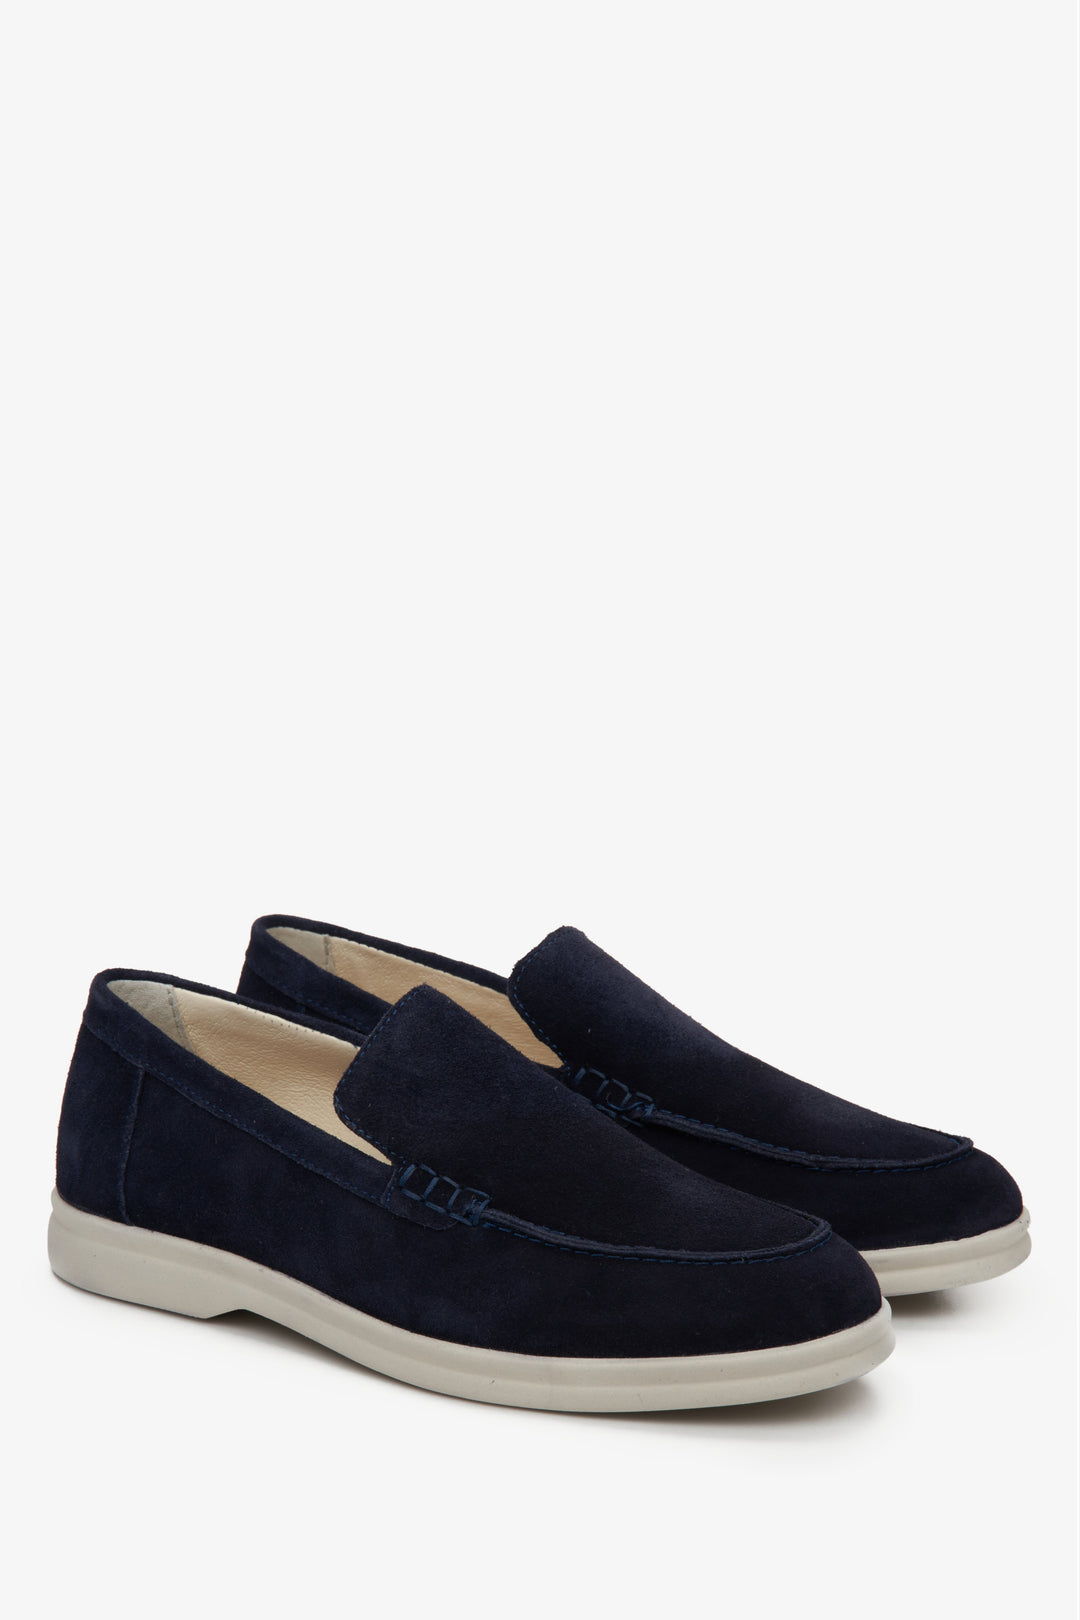 Women's suede loafers in navy blue Estro - presentation of the sideline and white sole.